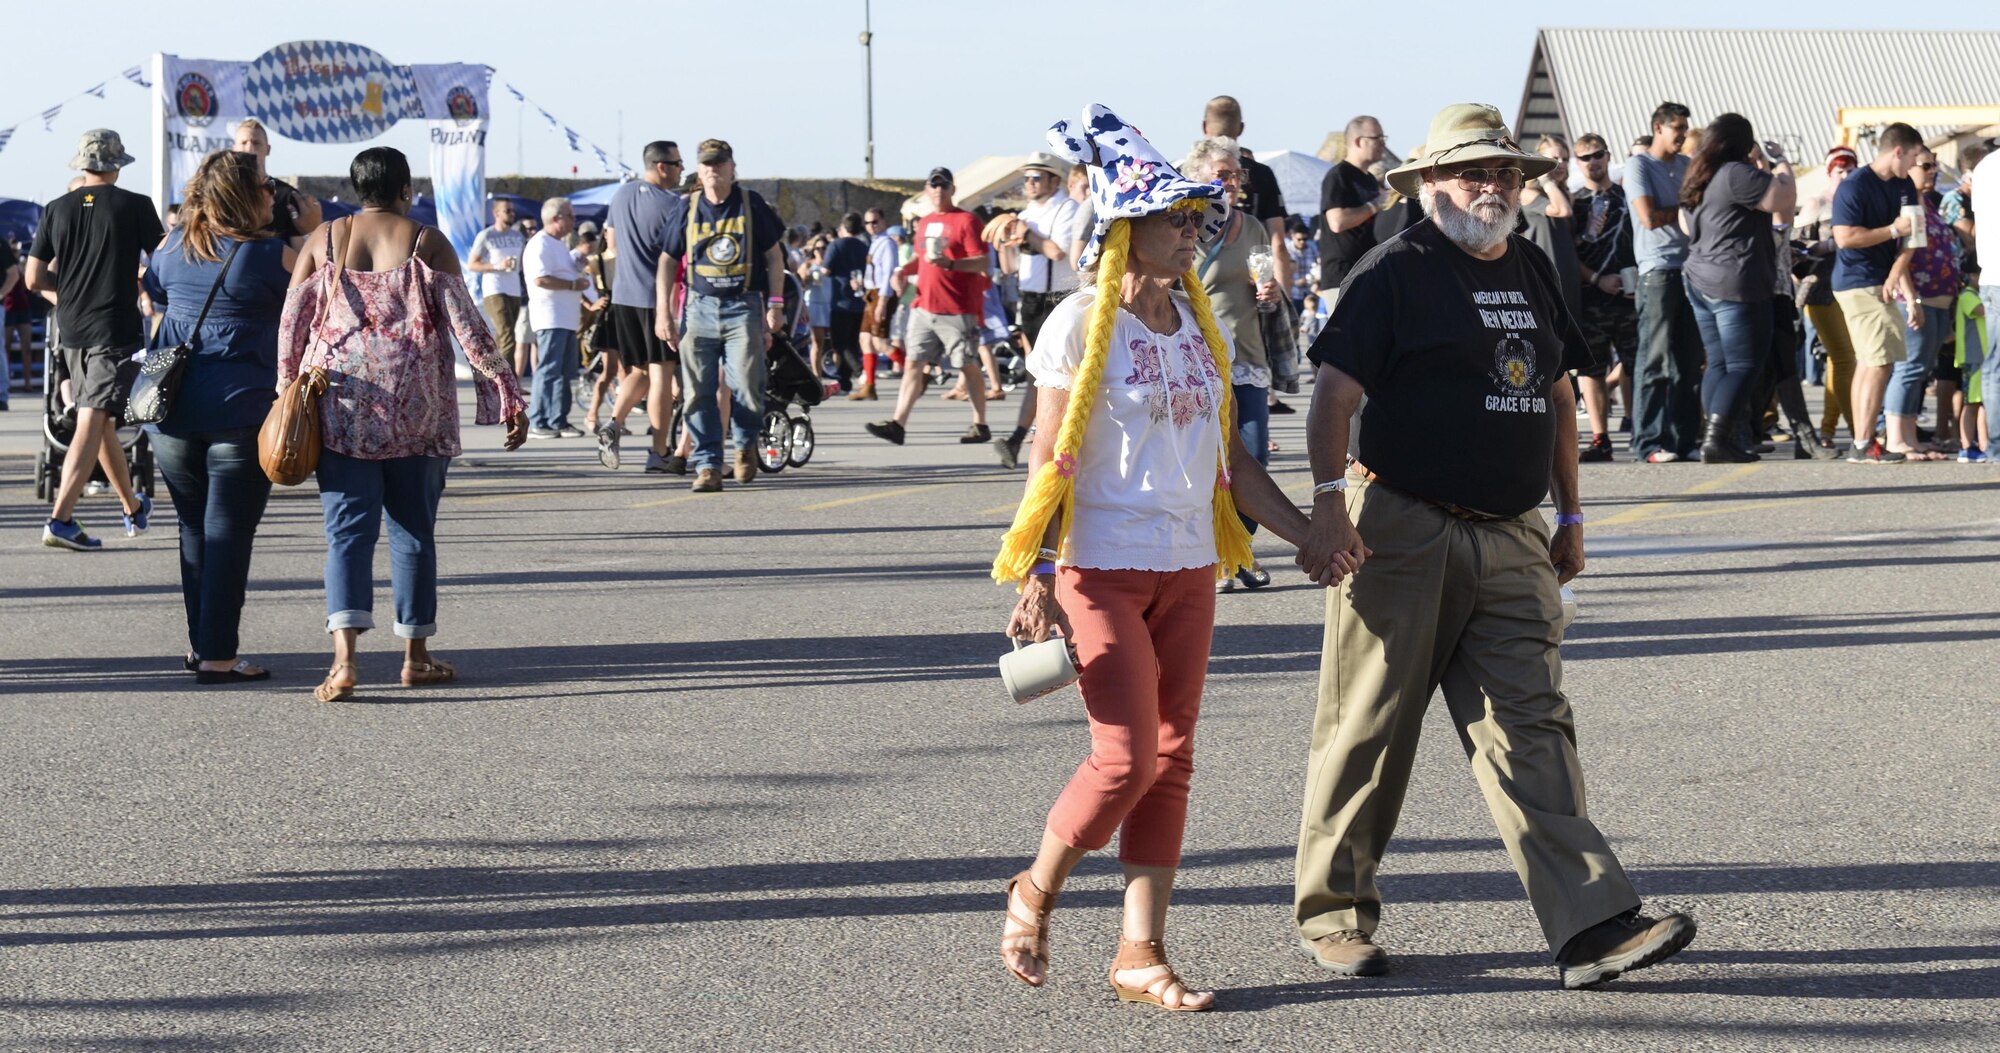 A couple take a stroll and enjoy the sites during the 20th annual Oktoberfest at Holloman Air Force Base, N.M. on Sept. 10, 2016. Thousands of Holloman Airmen and their families attended this year’s Oktoberfest. (U.S. Air Force photo by Airman Alexis P. Docherty) 